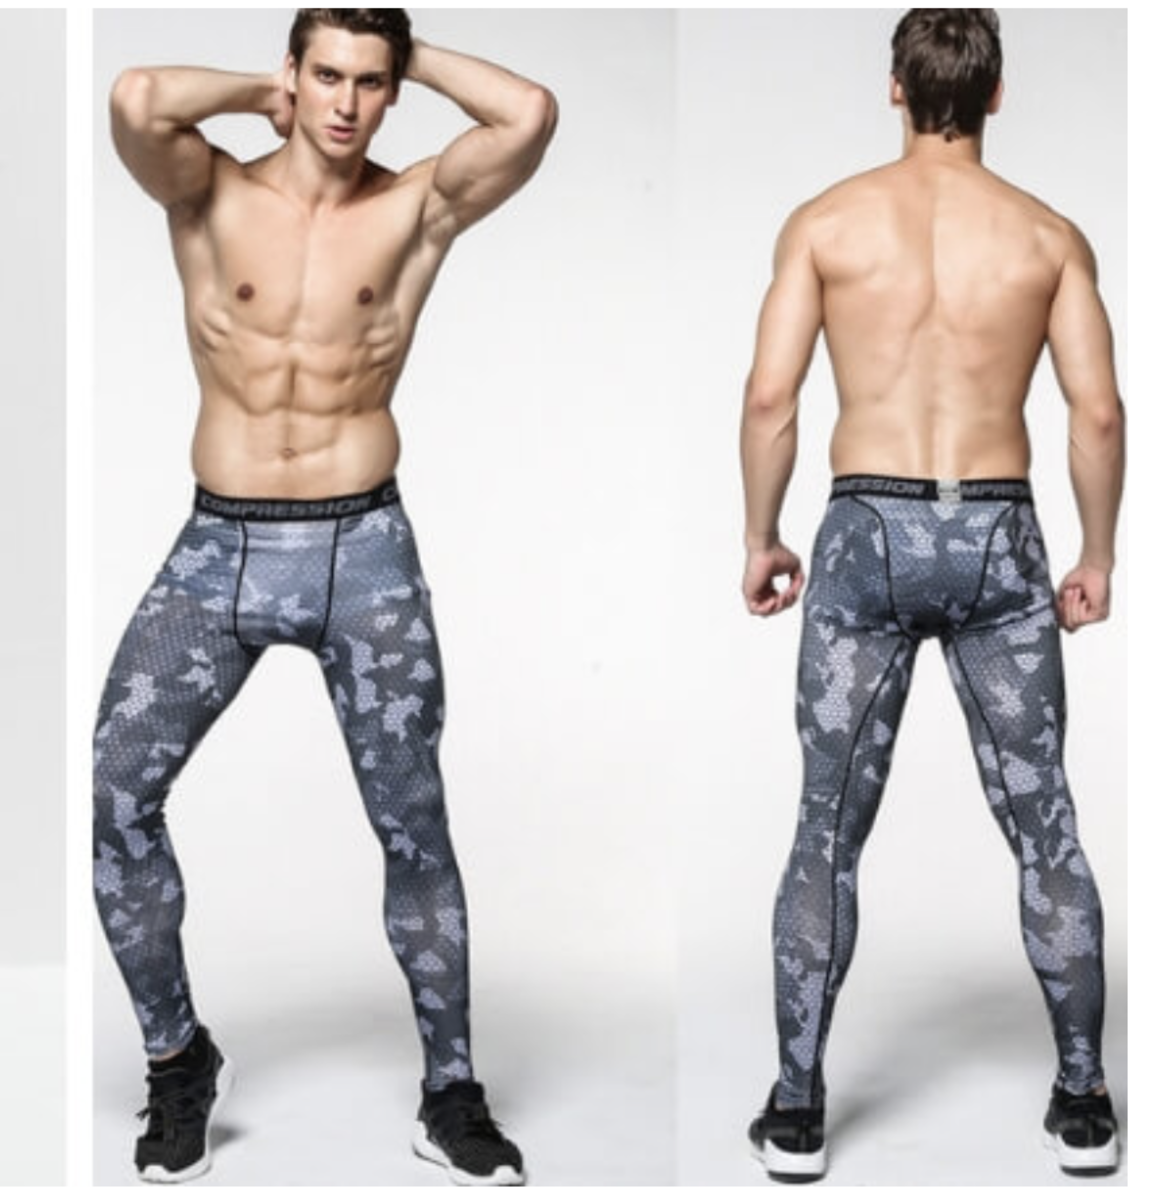 Leggings can also be sporty and masculine